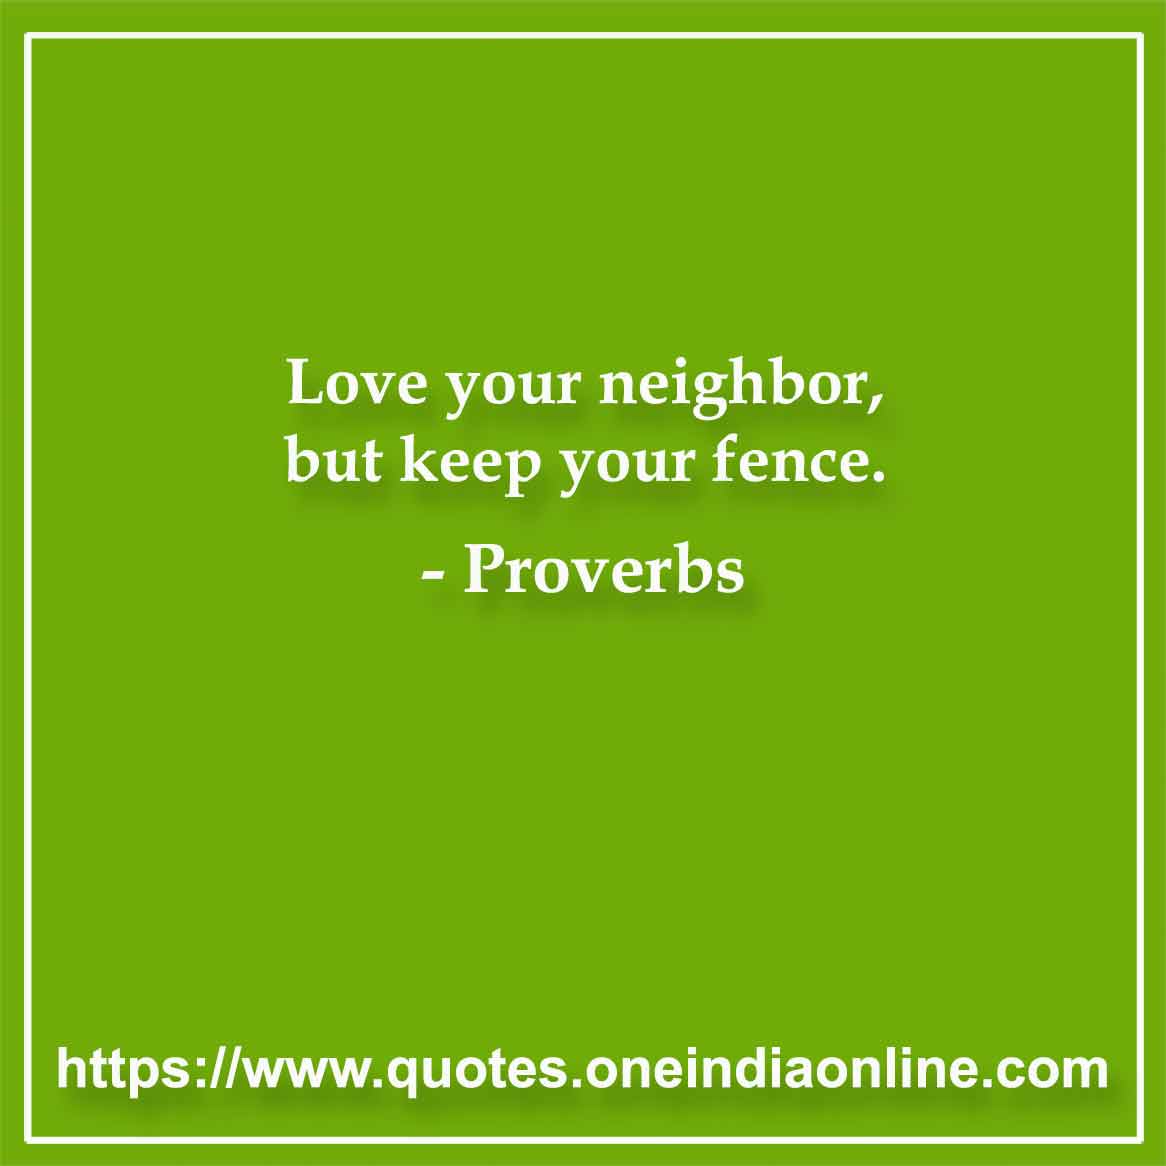 Love your neighbor, but keep your fence.